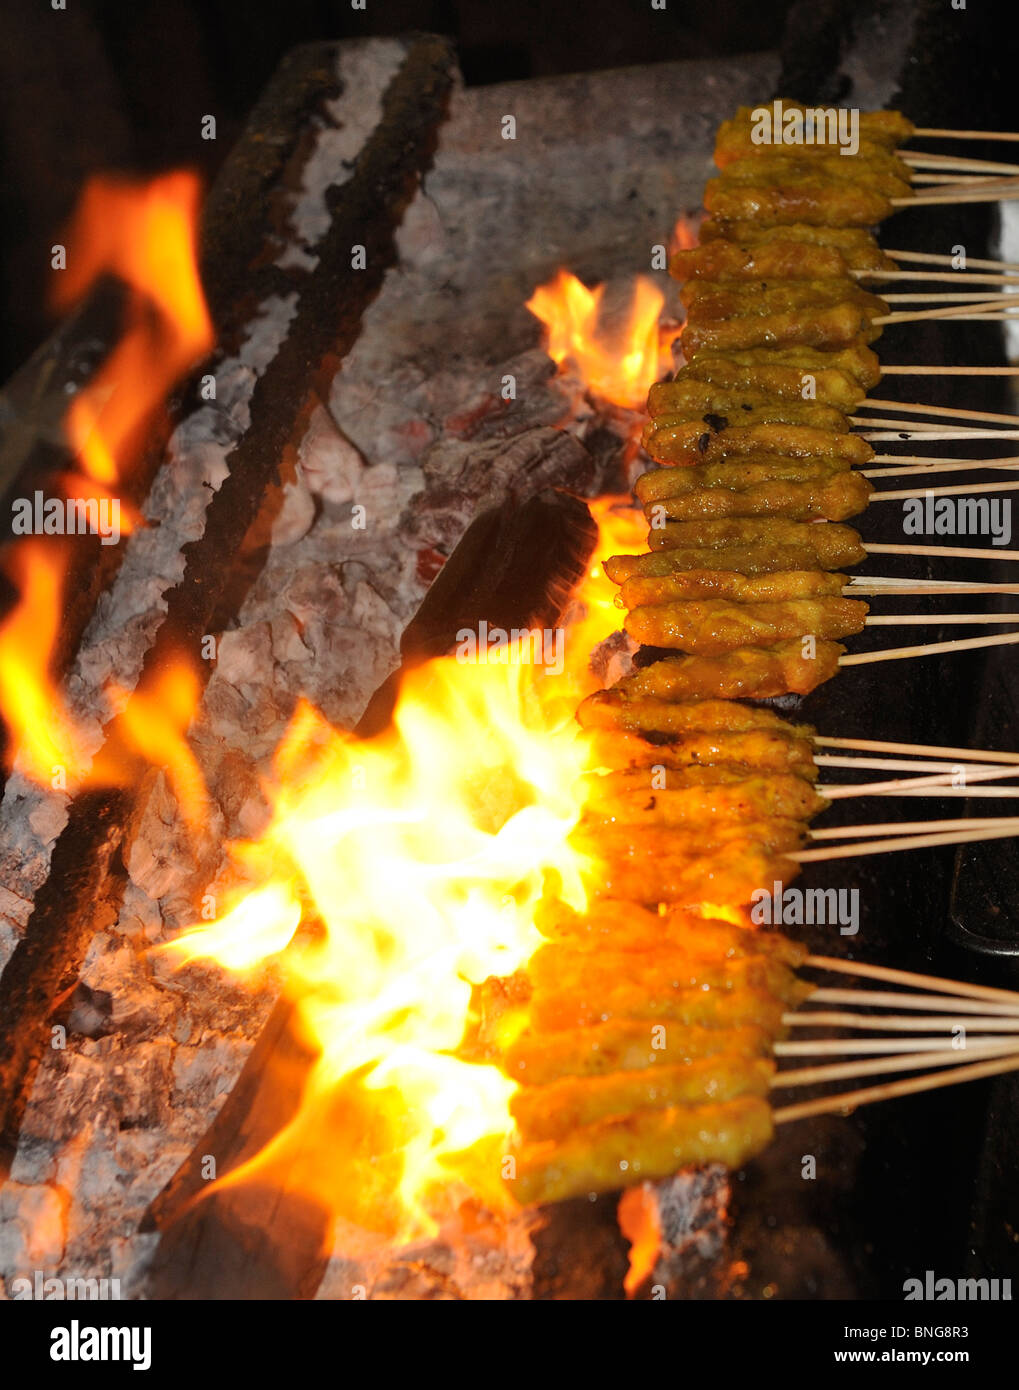 Satay chicken on skewers being cooked with an open flame at Lau Pa Sat hawker stalls in Singapore Stock Photo